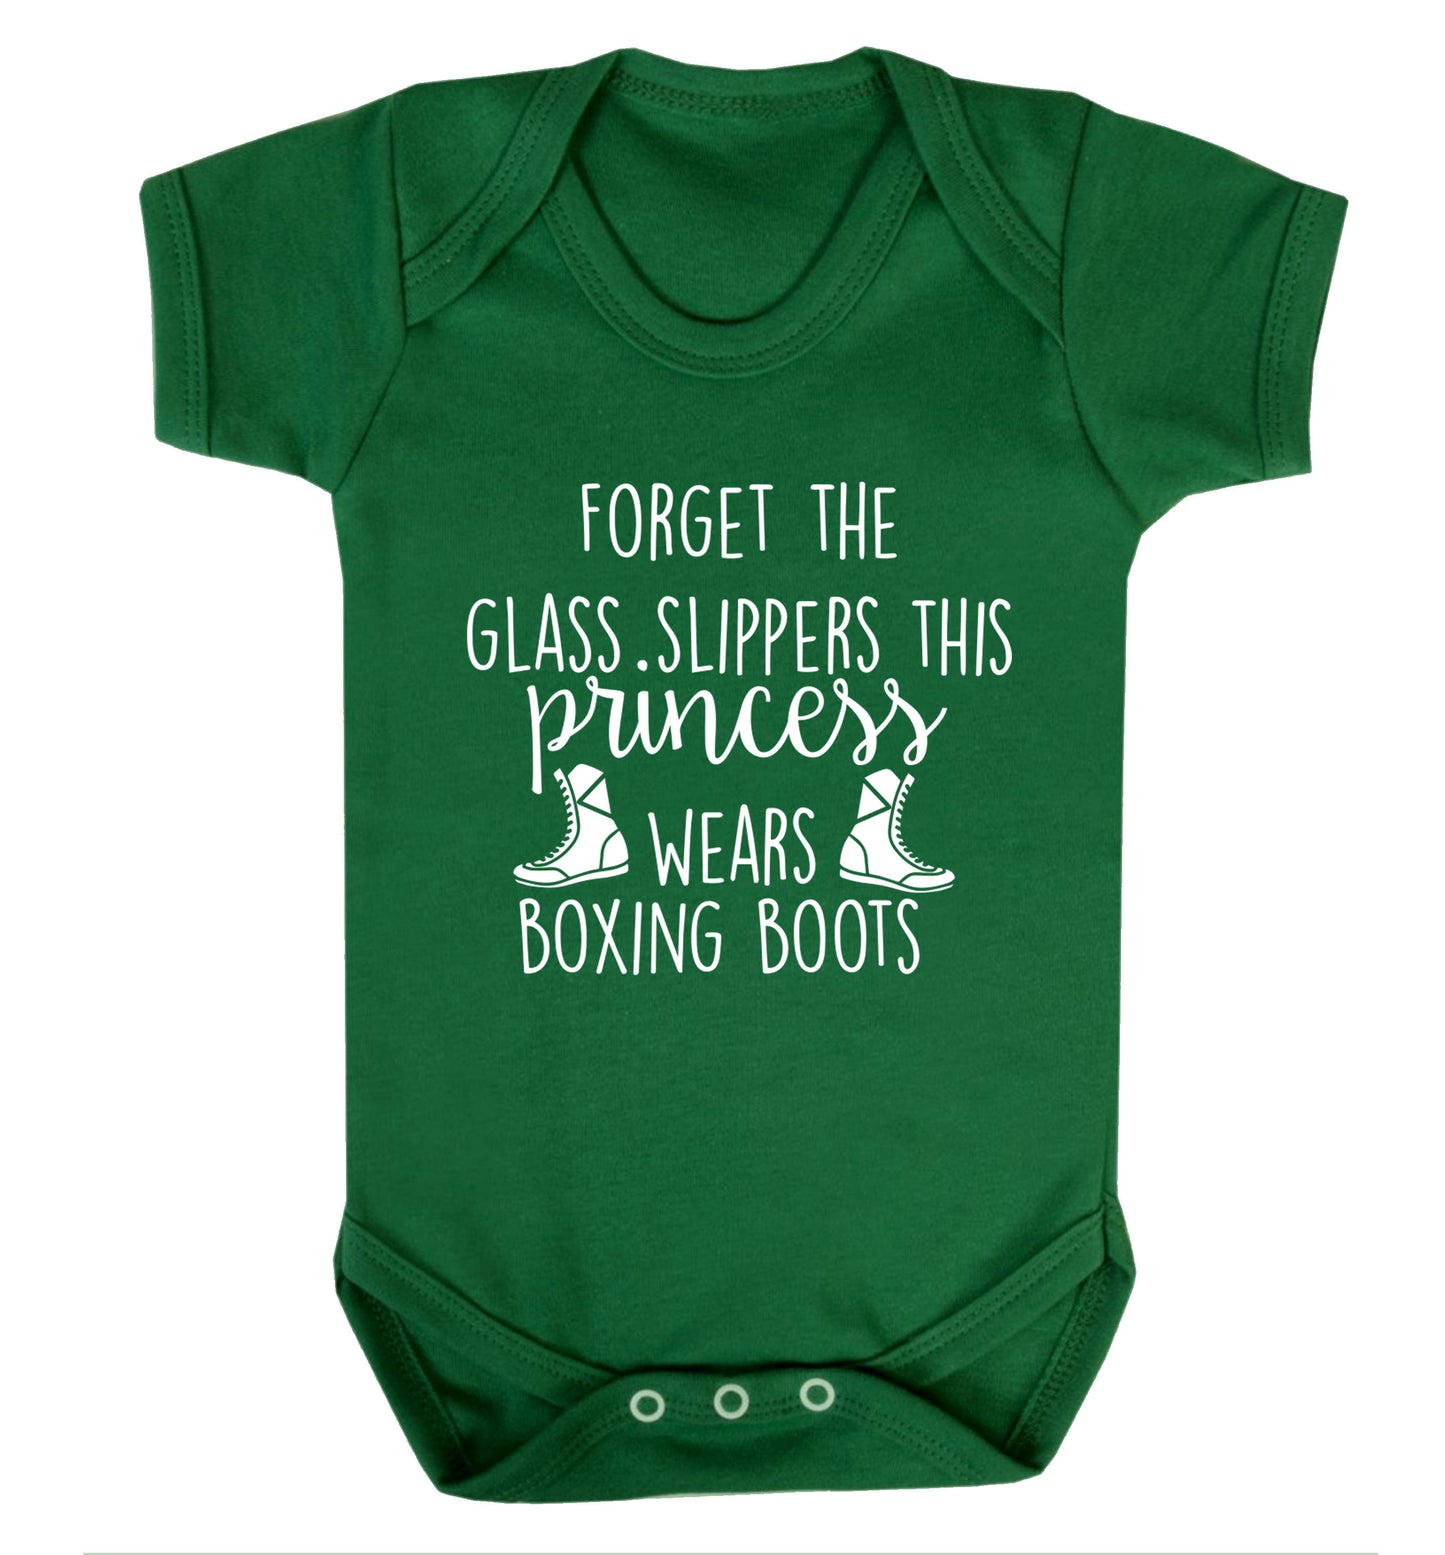 Forget the glass slippers this princess wears boxing boots Baby Vest green 18-24 months